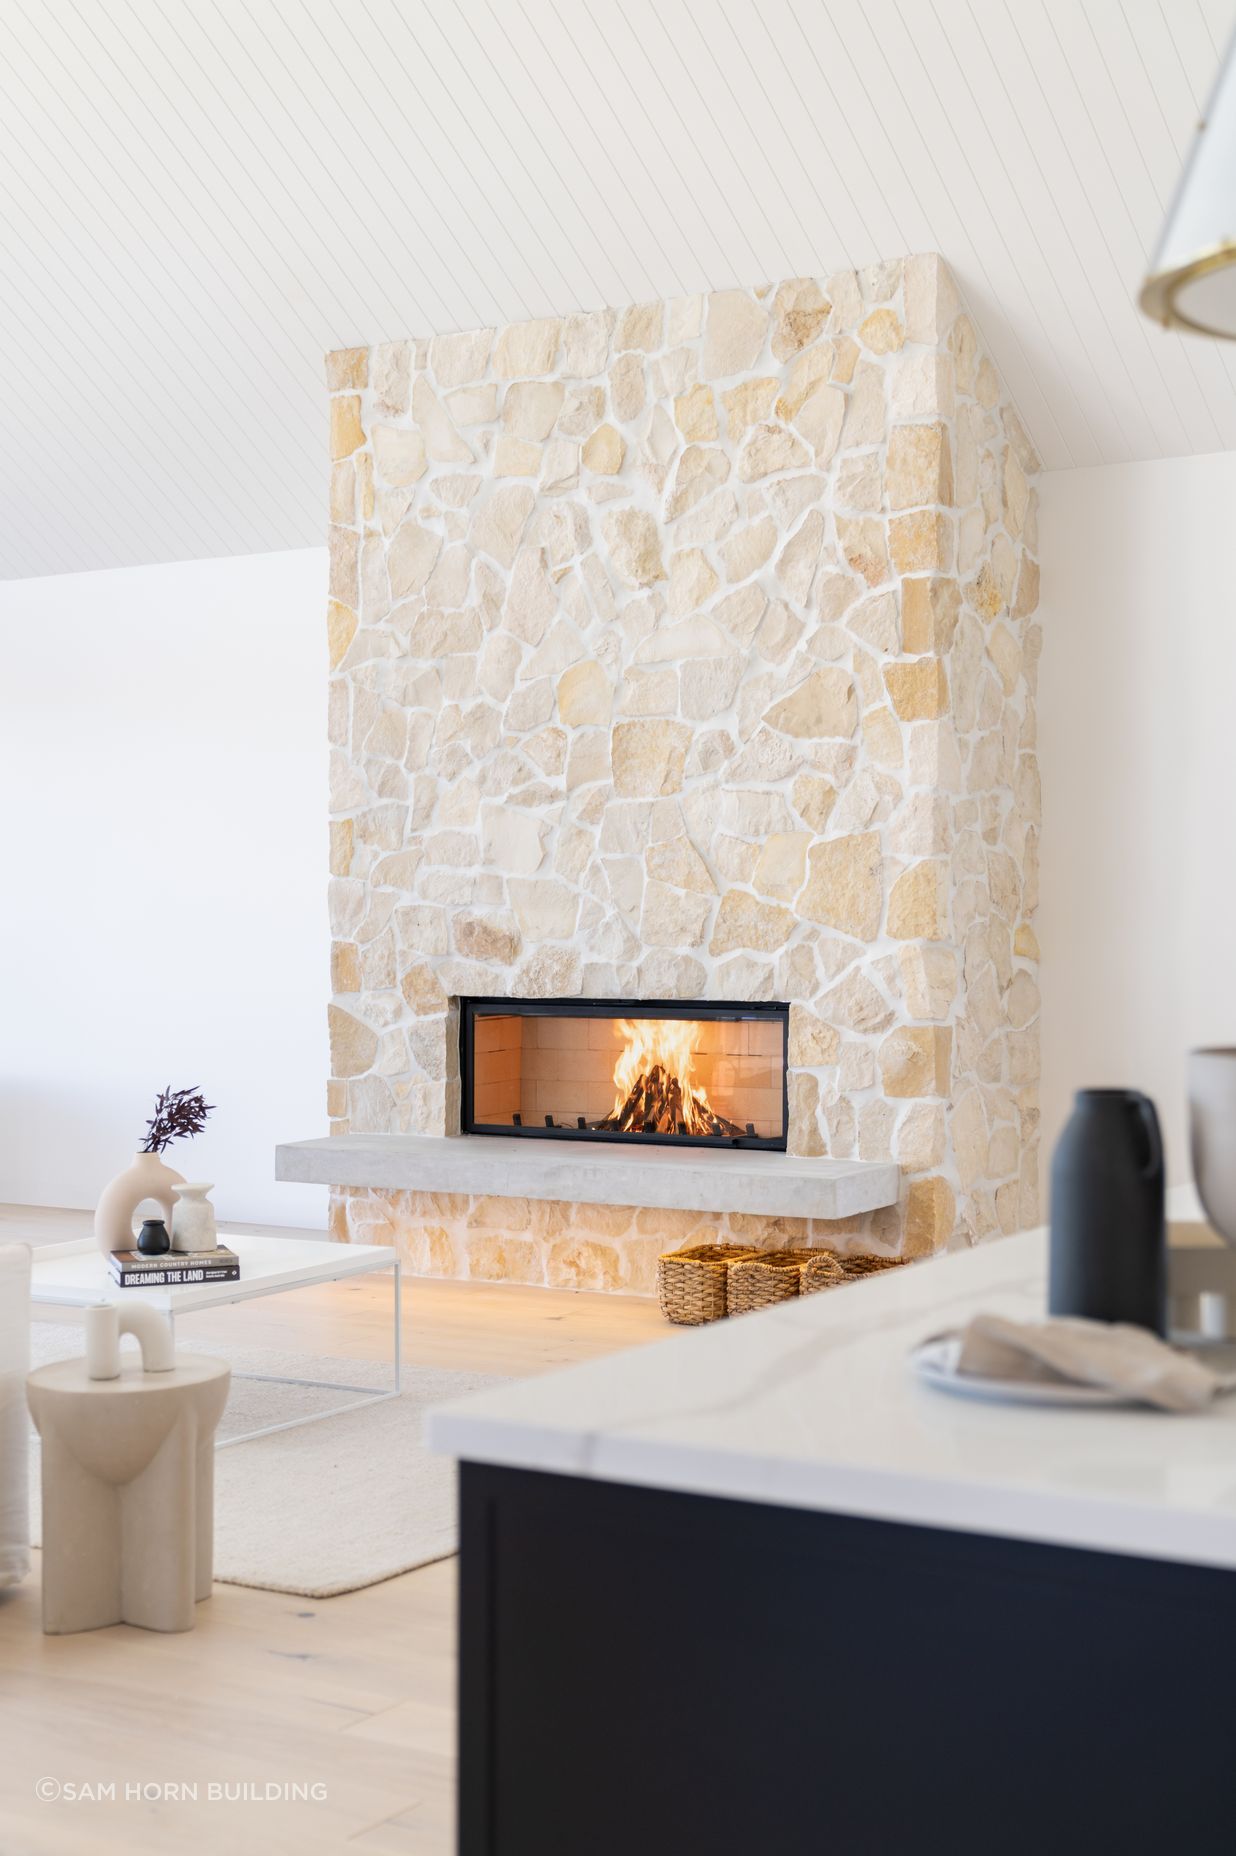 Axis H1600 featured in stacked stone wall